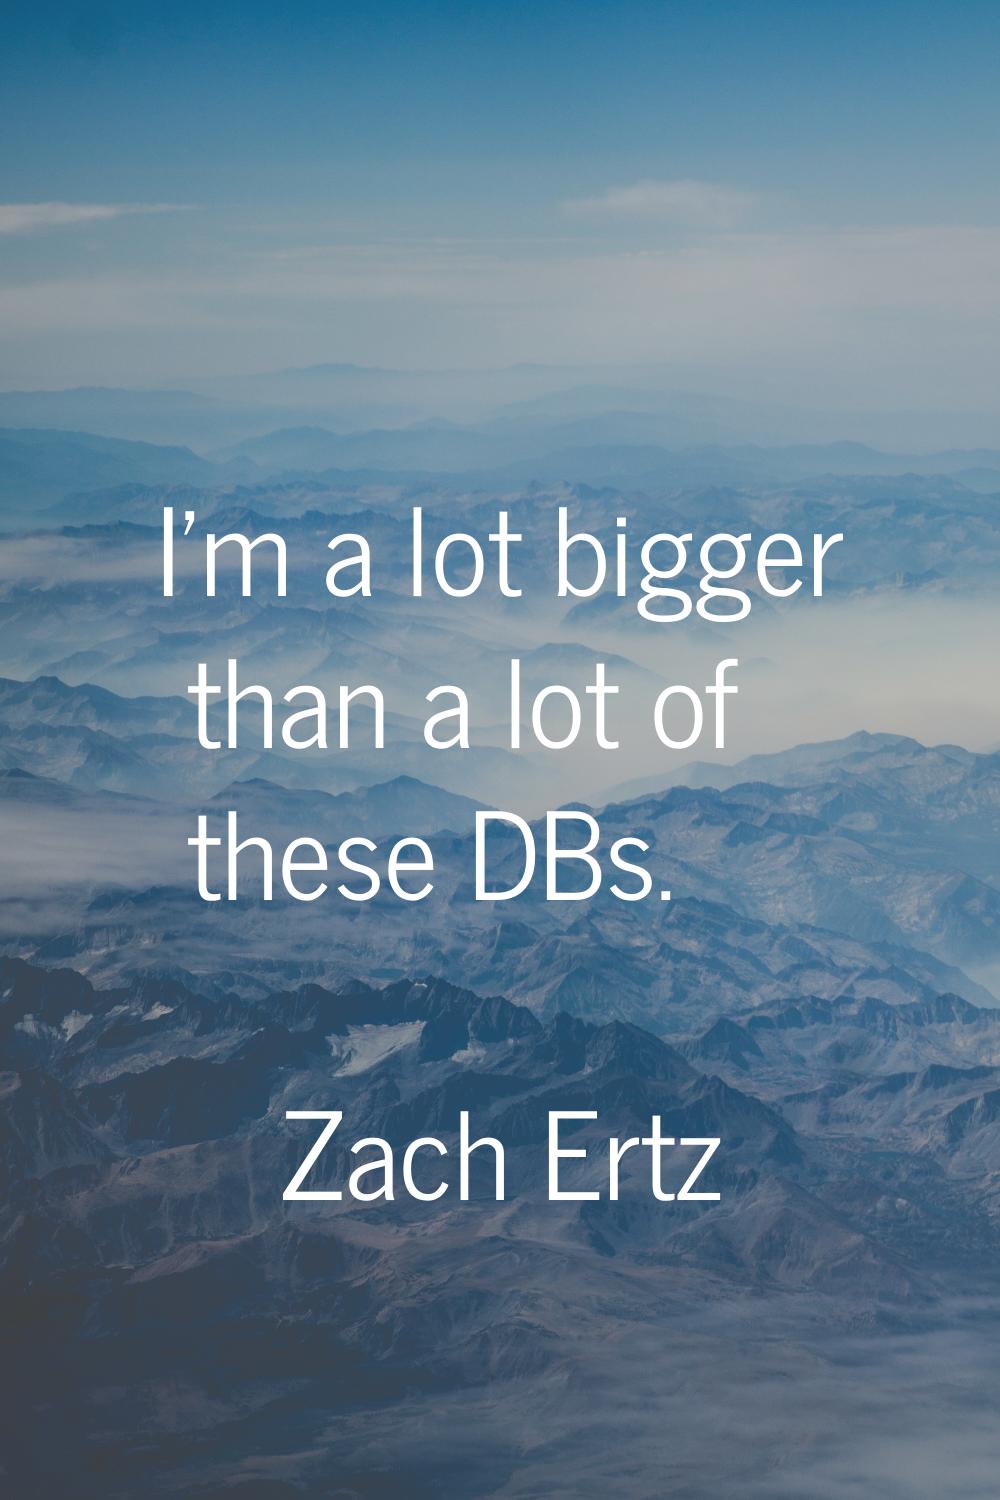 I'm a lot bigger than a lot of these DBs.